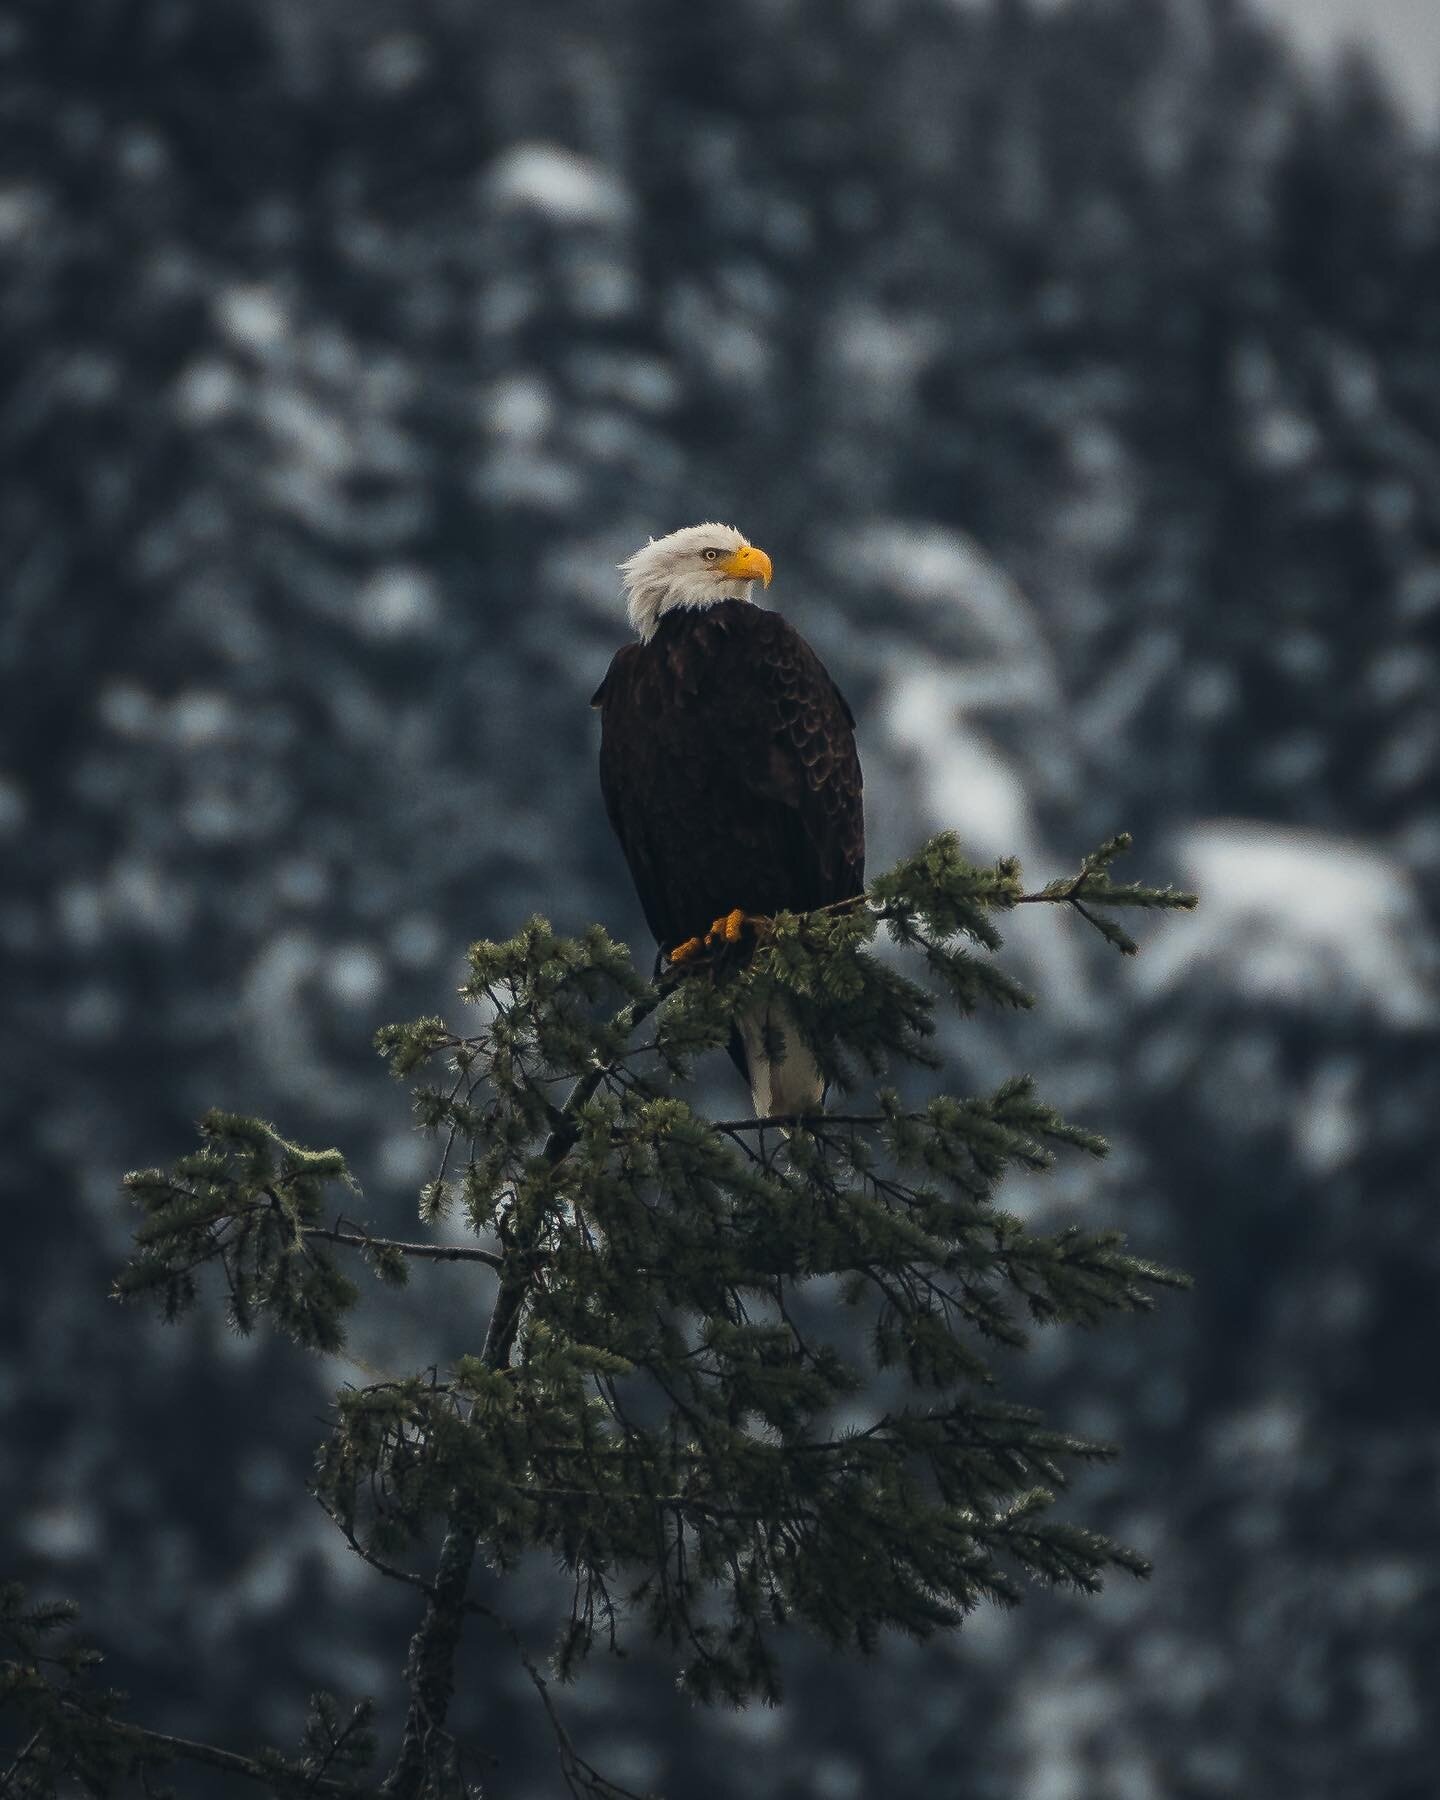 King of the skies. 
__________________________________

I went out scouting for eagles last week right after we received a bunch of snow here in Washington. Needless to say, it&rsquo;s like finding a needle in a hay stack with most trees covered with